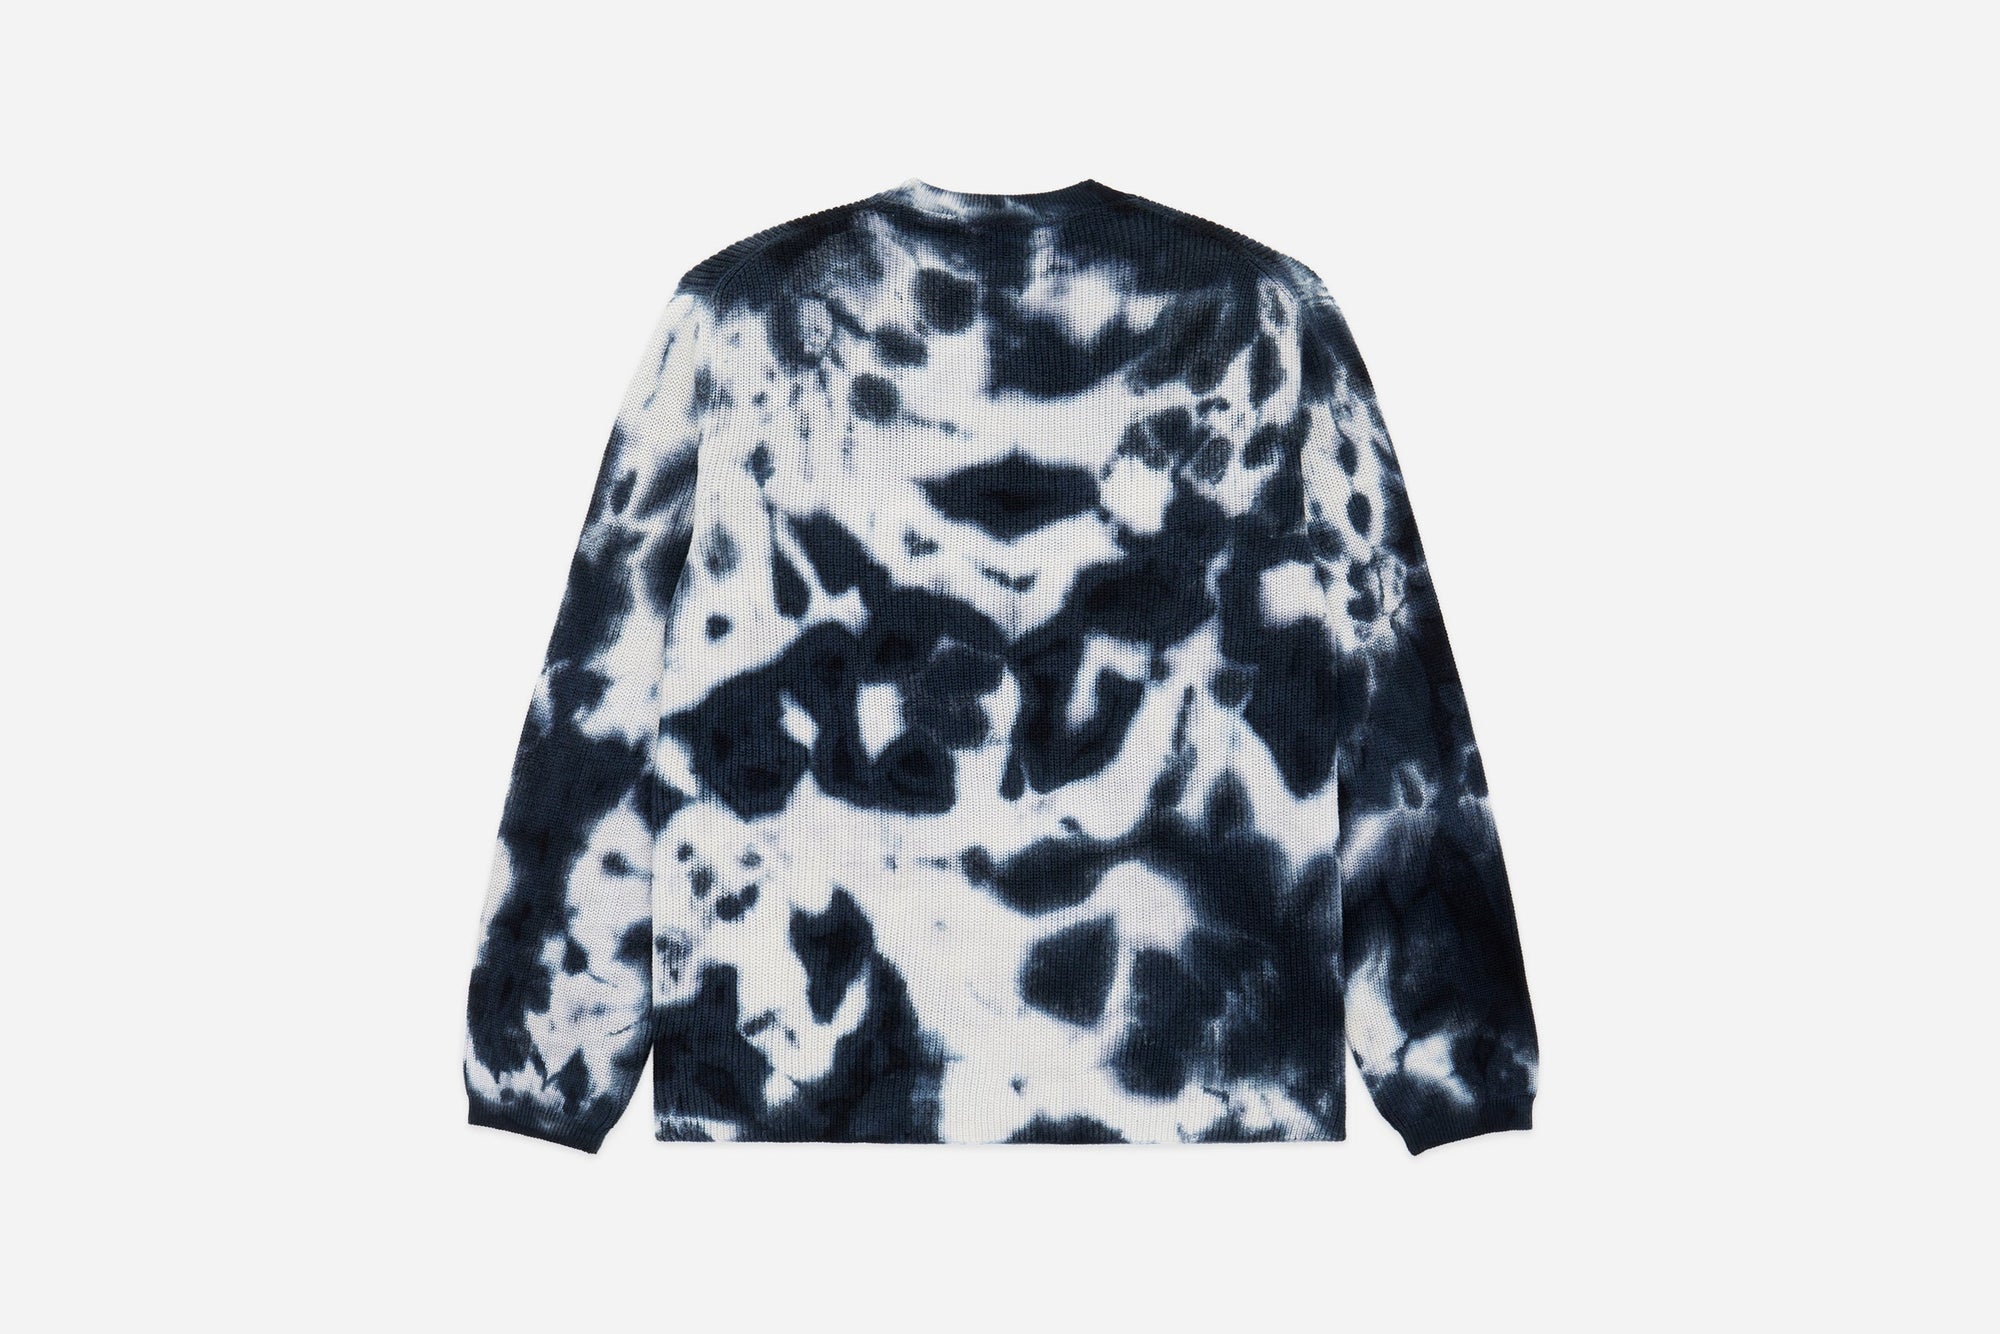 3Sixteen Garment Dyed Knit Long Sleeve Sweater in Ink Blot